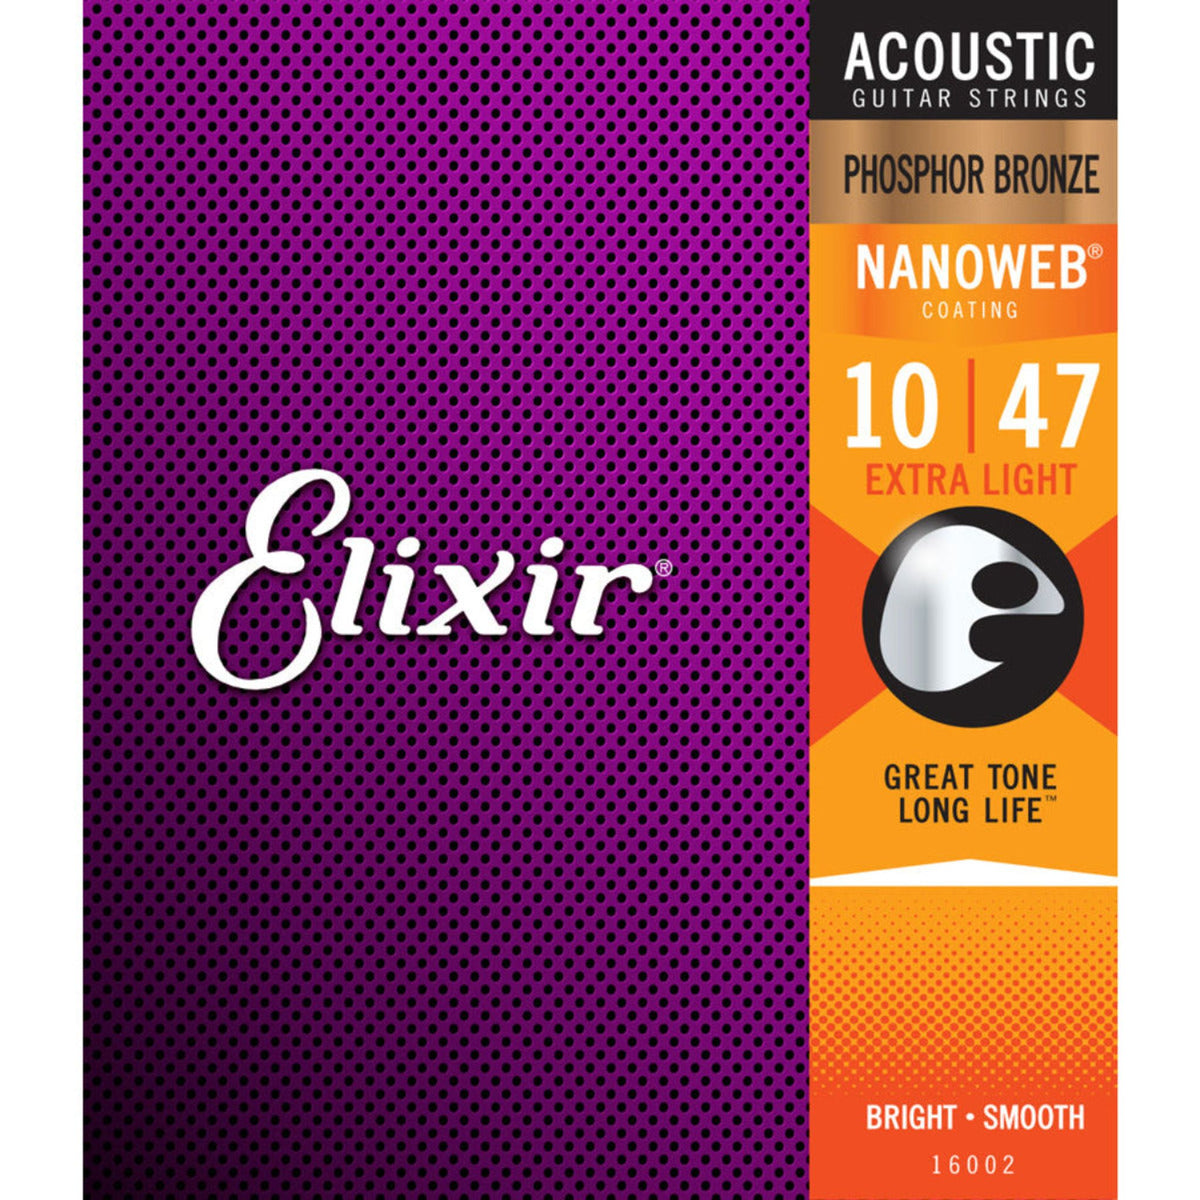 The Elixir 16002 strings are known for their great tone and long life. Elixir strings amp up your guitar’s tone life with the same premium electric guitar strings that experienced players worldwide